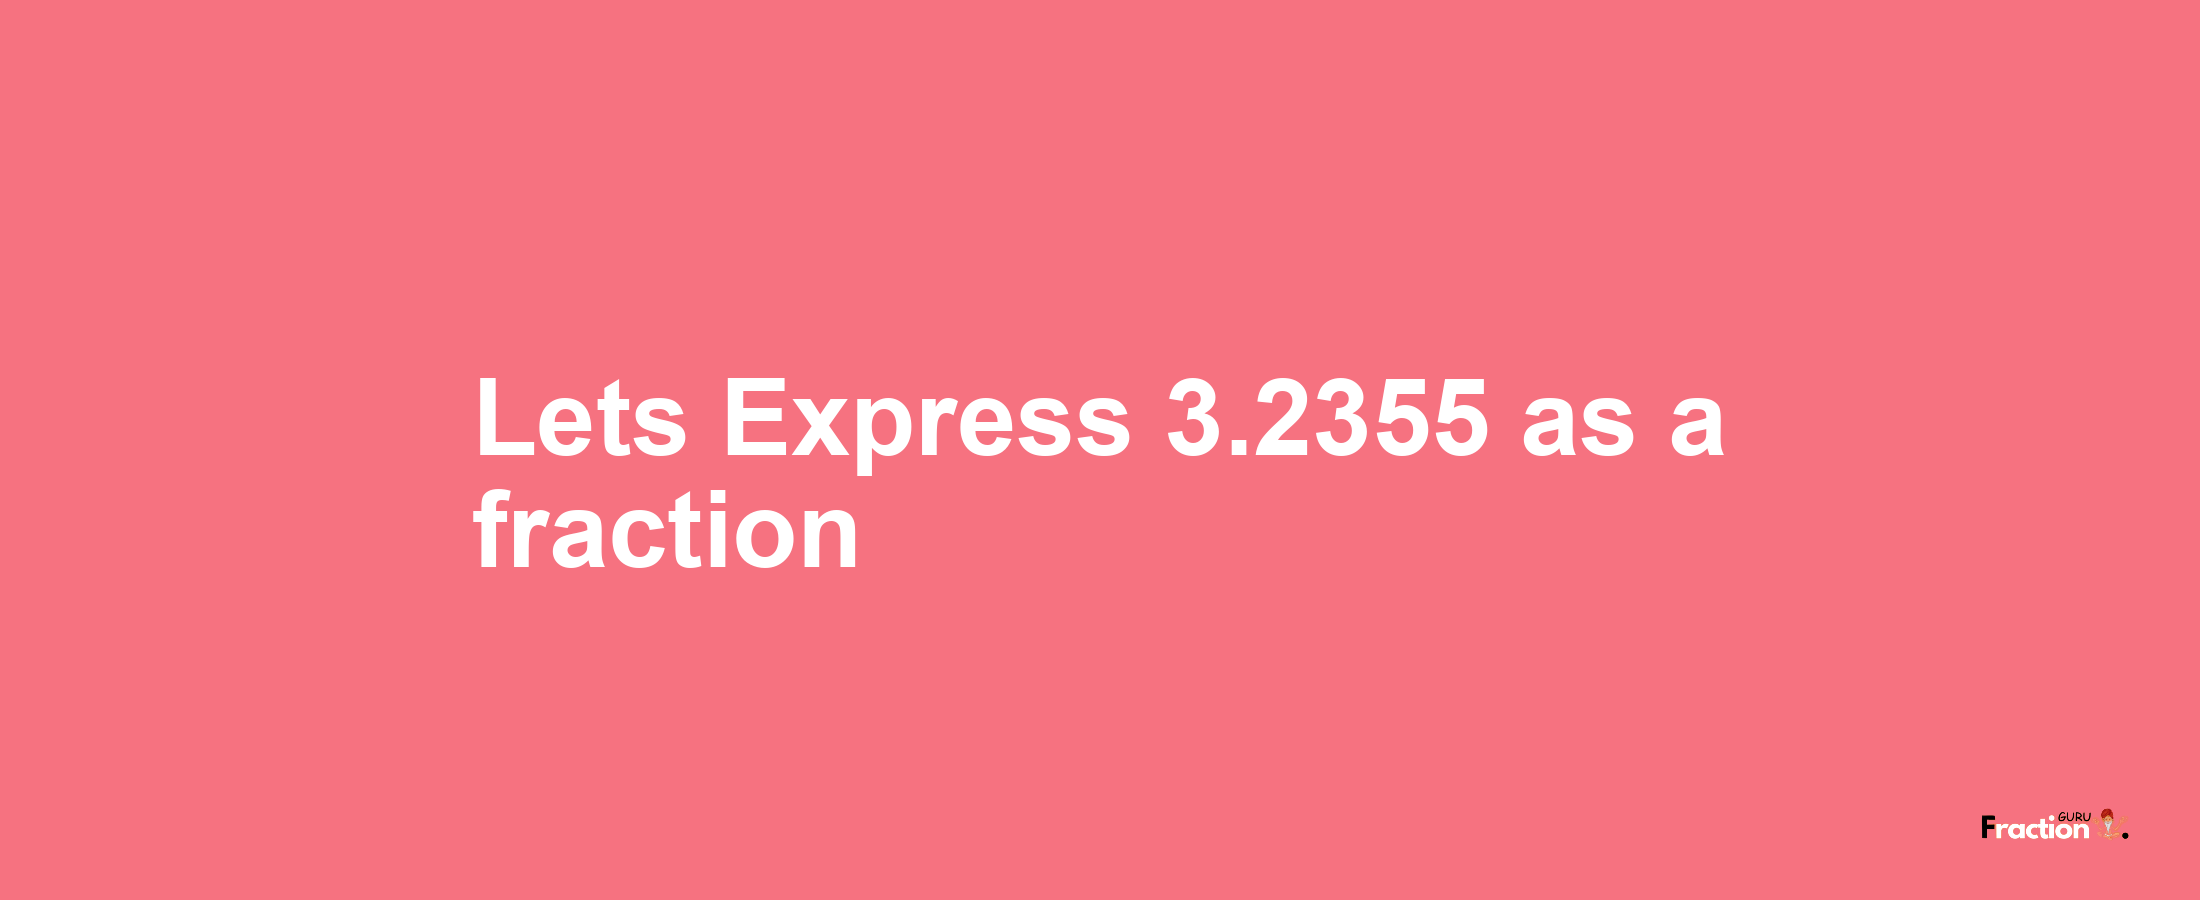 Lets Express 3.2355 as afraction